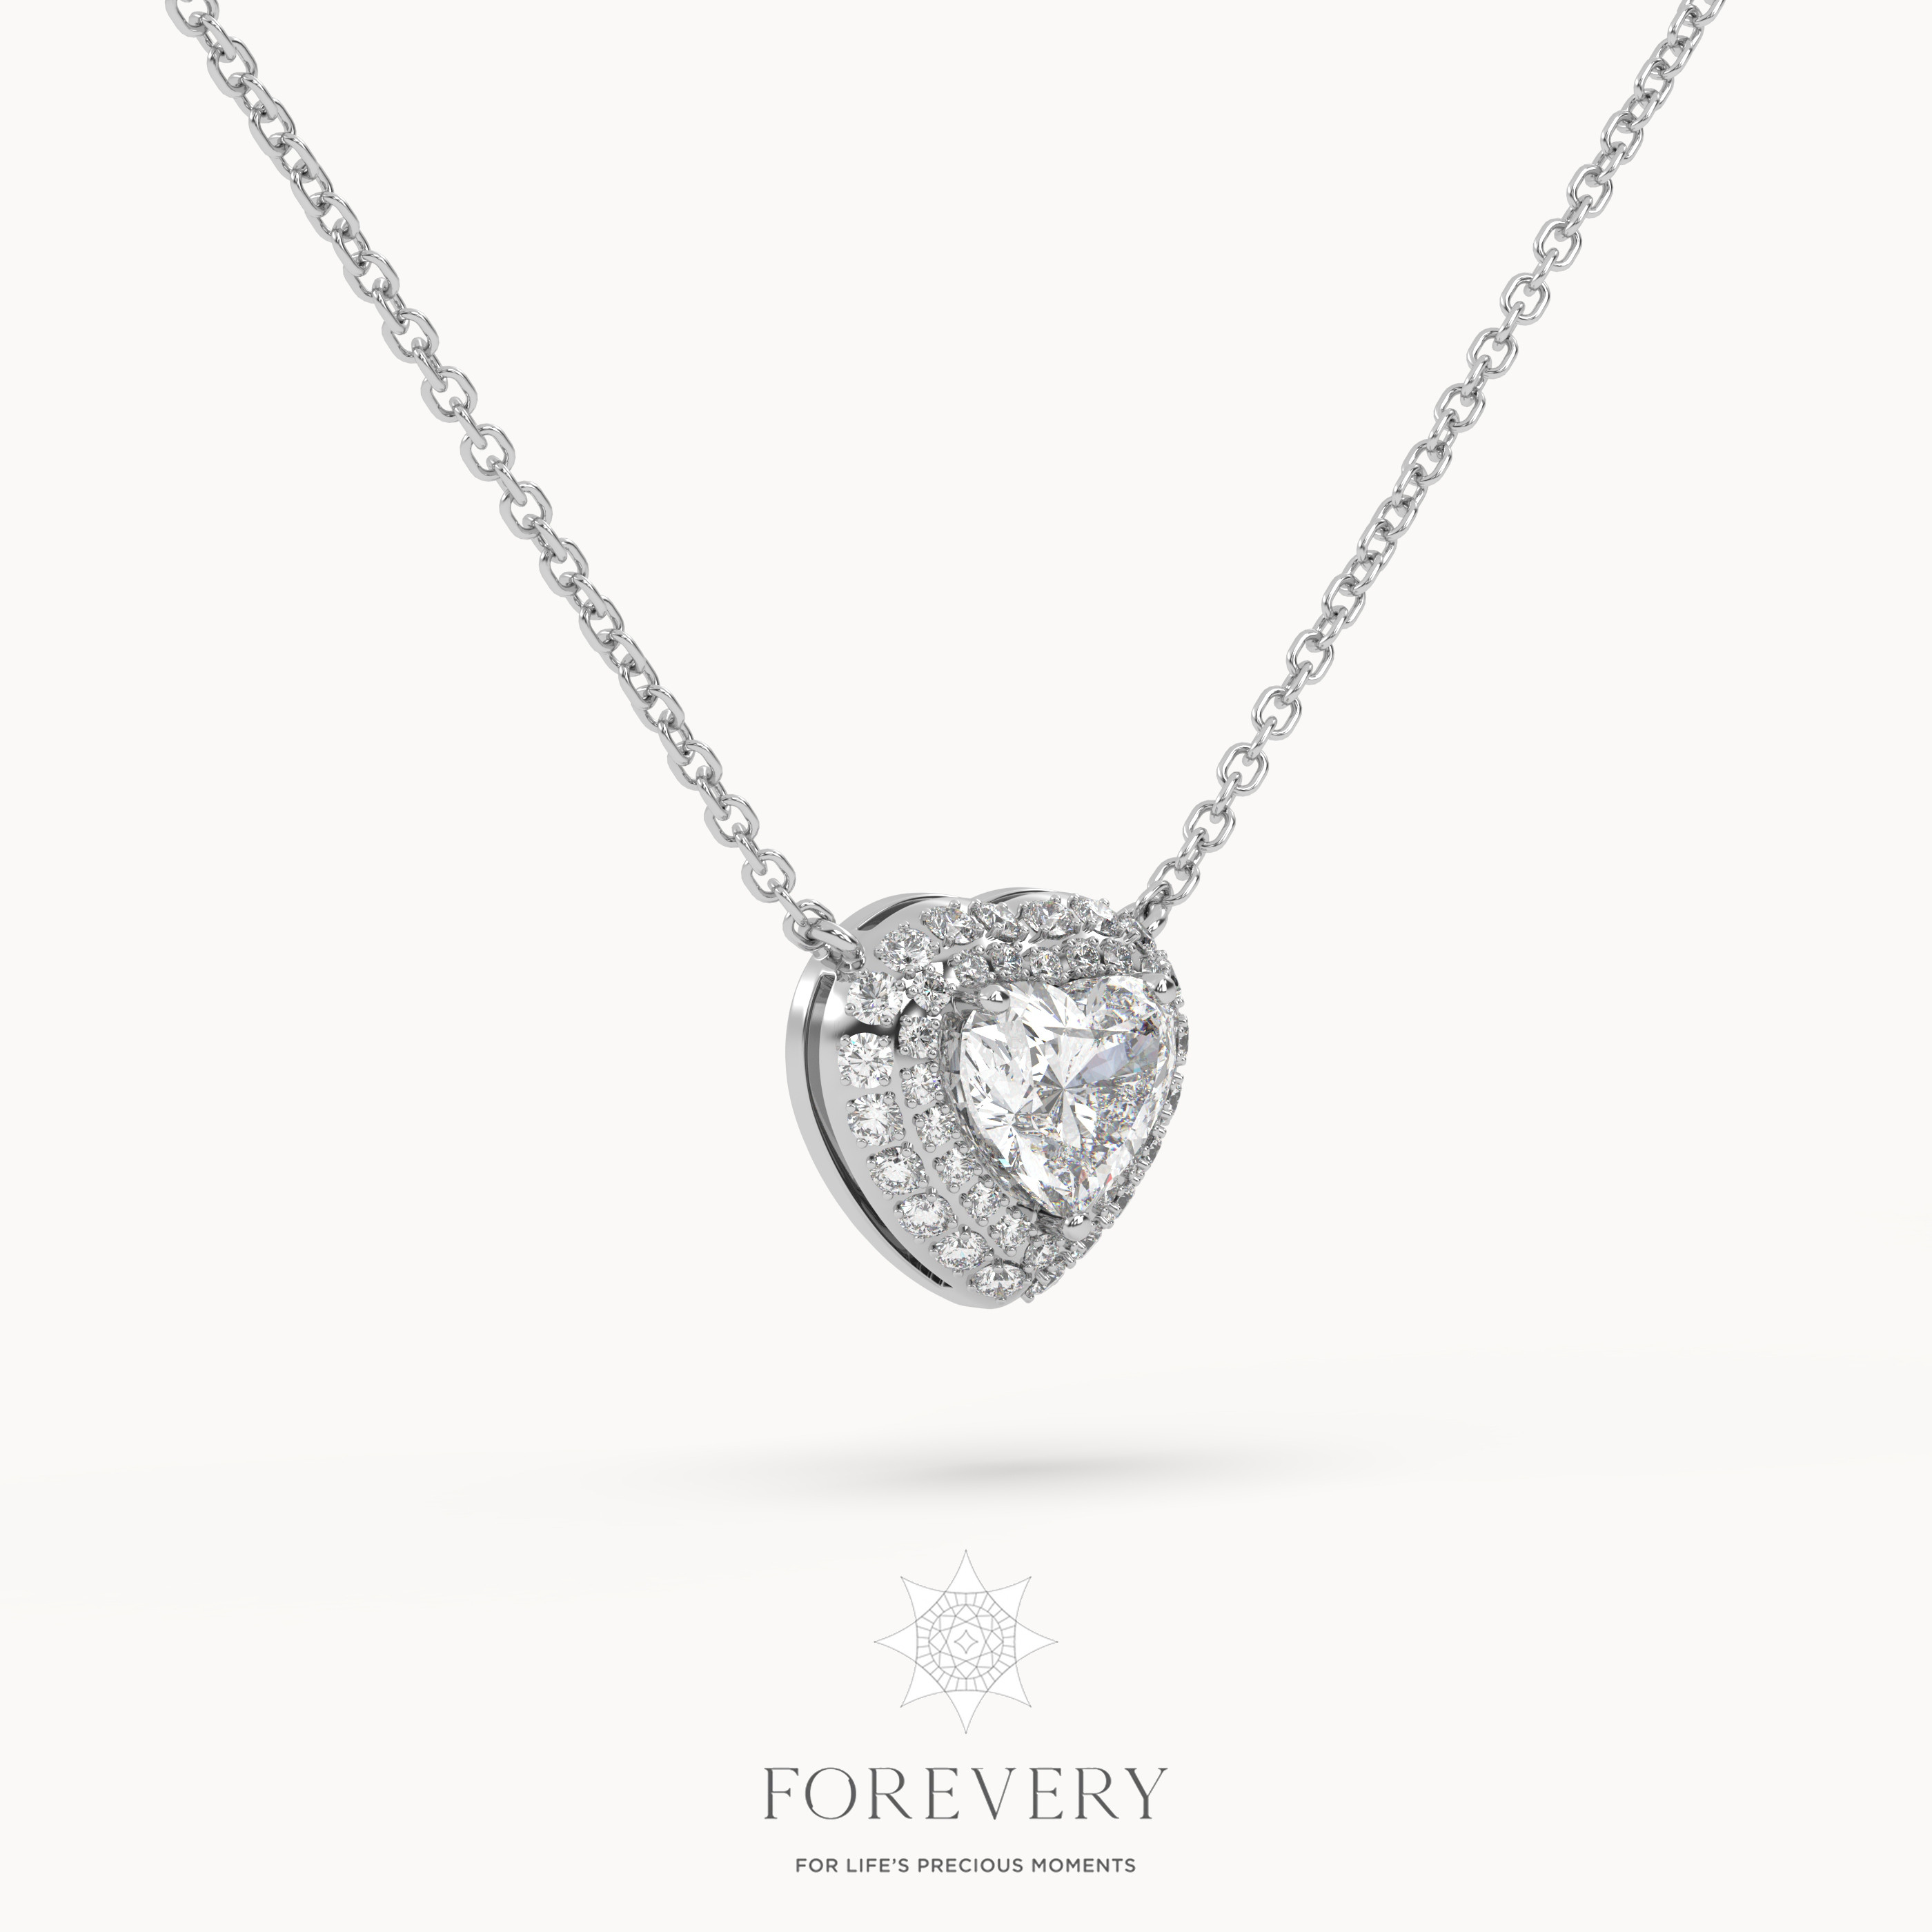 18K WHITE GOLD Solitaire Pendant with Heart Shaped Diamond